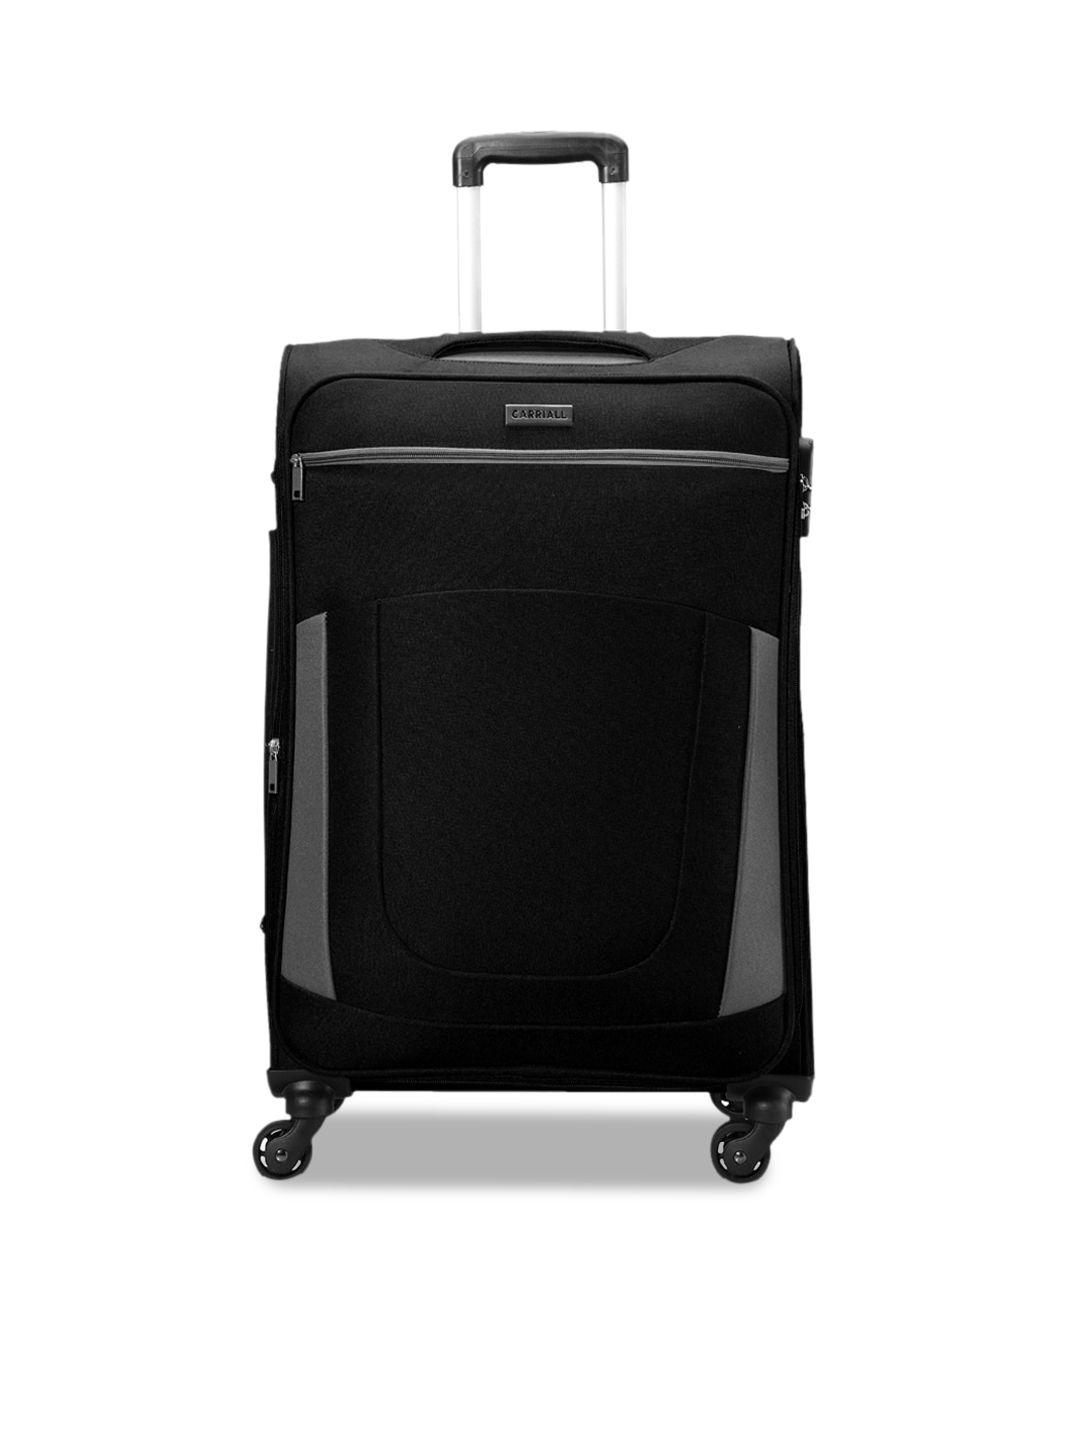 carriall black & grey solid soft-sided trolley suitcase